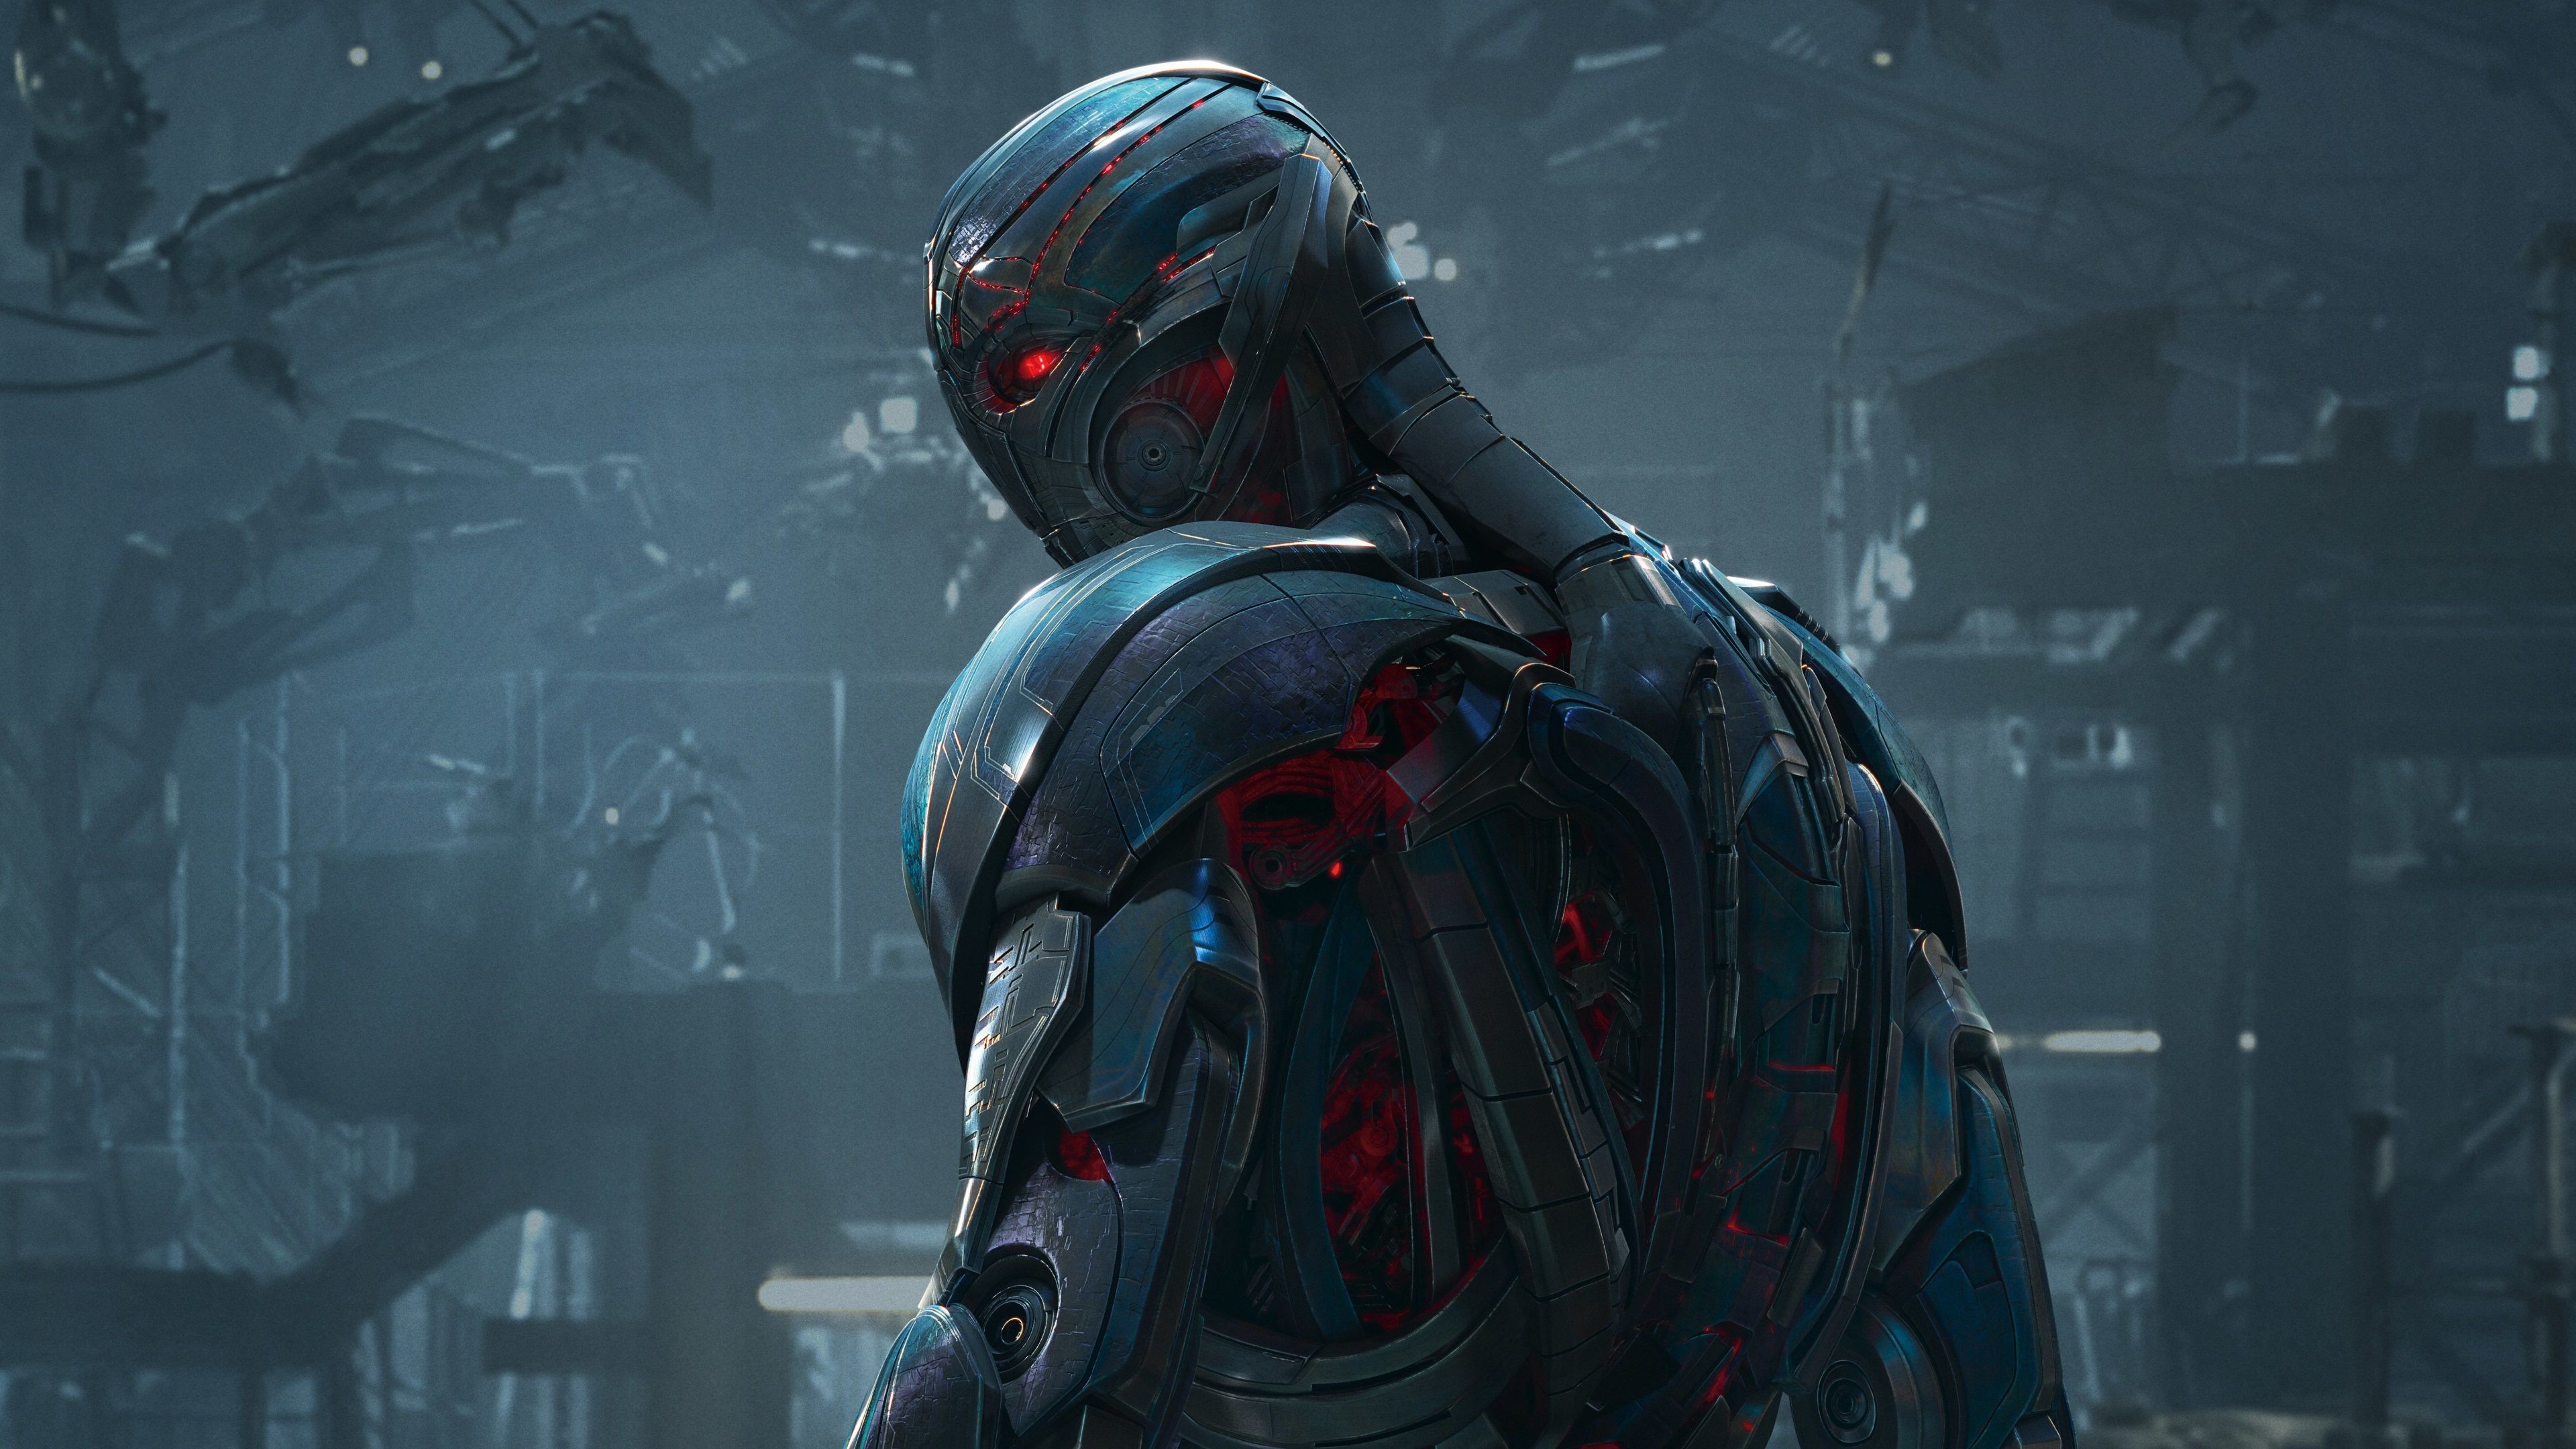 ultron 4k wallpaper HD download. Ultron movie, Age of ultron, Avengers age